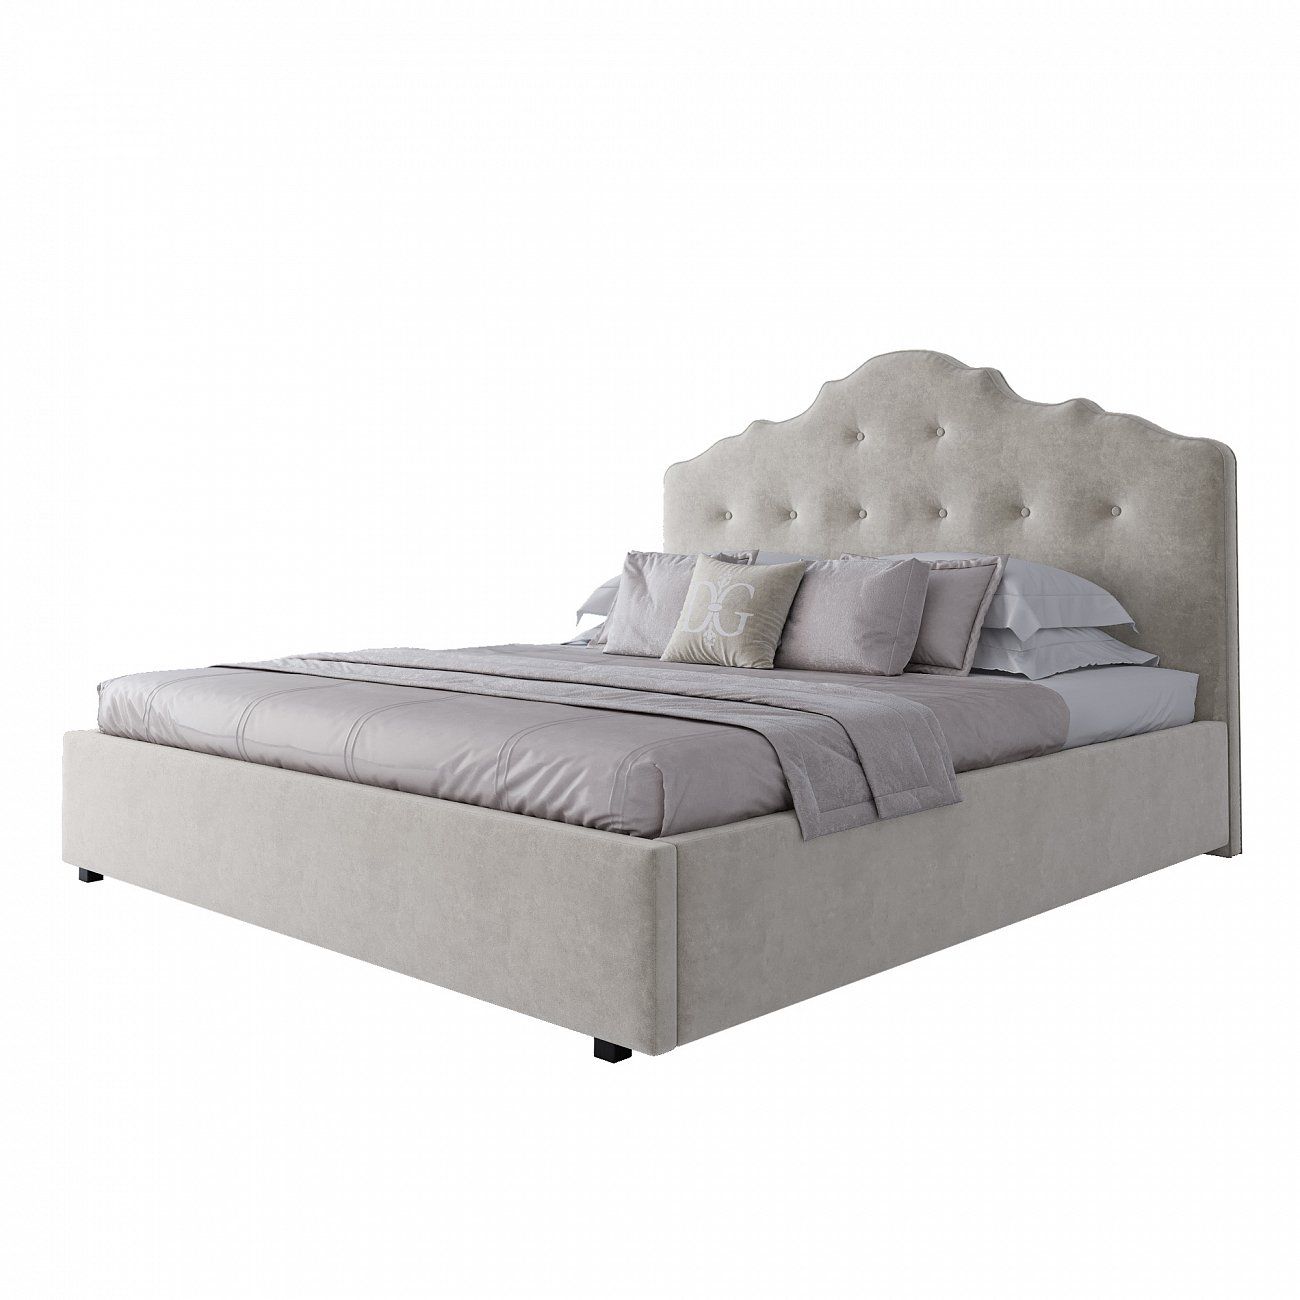 Double bed 180x200 Milk Palace